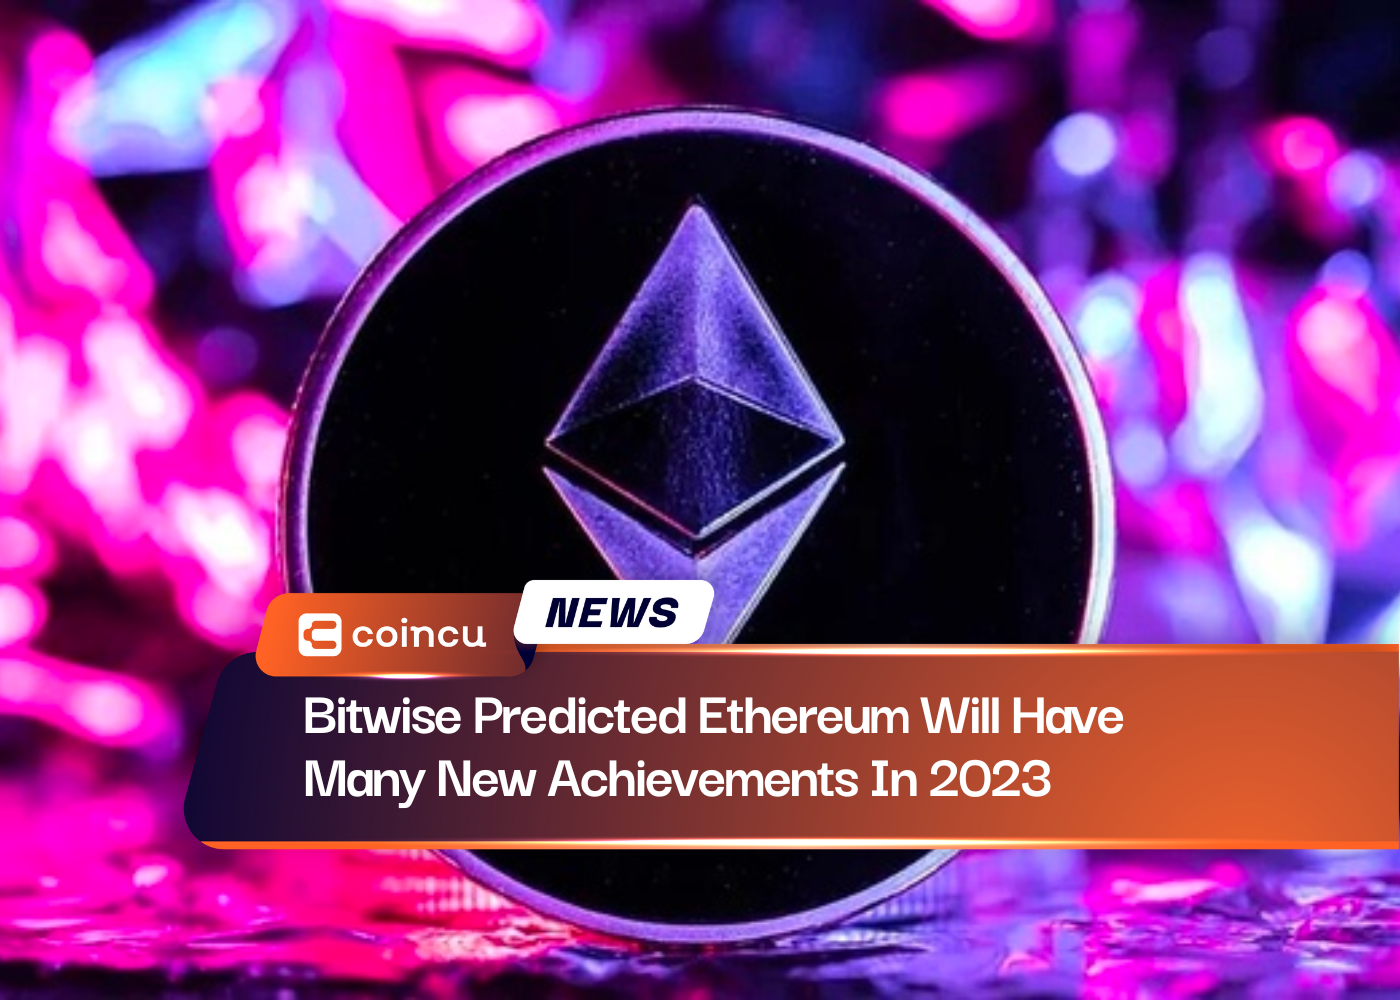 Bitwise Predicted Ethereum Will Have Many New Achievements In 2023